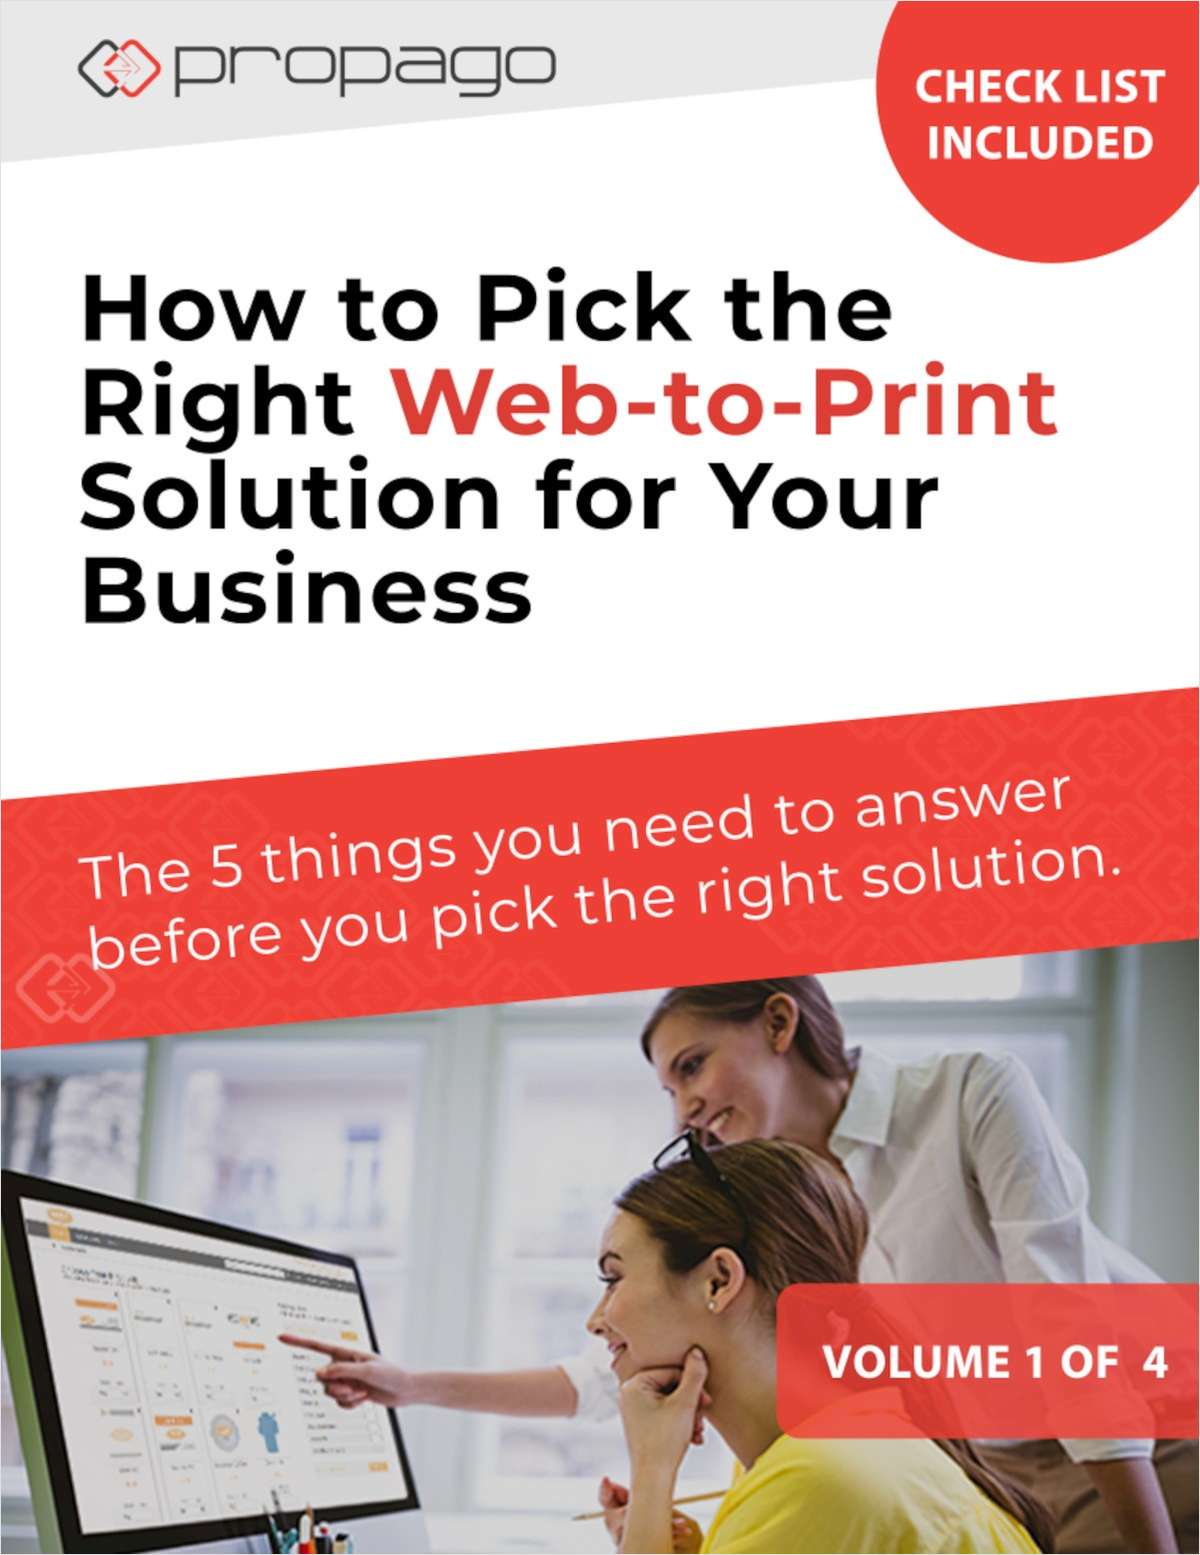 How to Pick the Right Web-to-Print Solution for Your Business